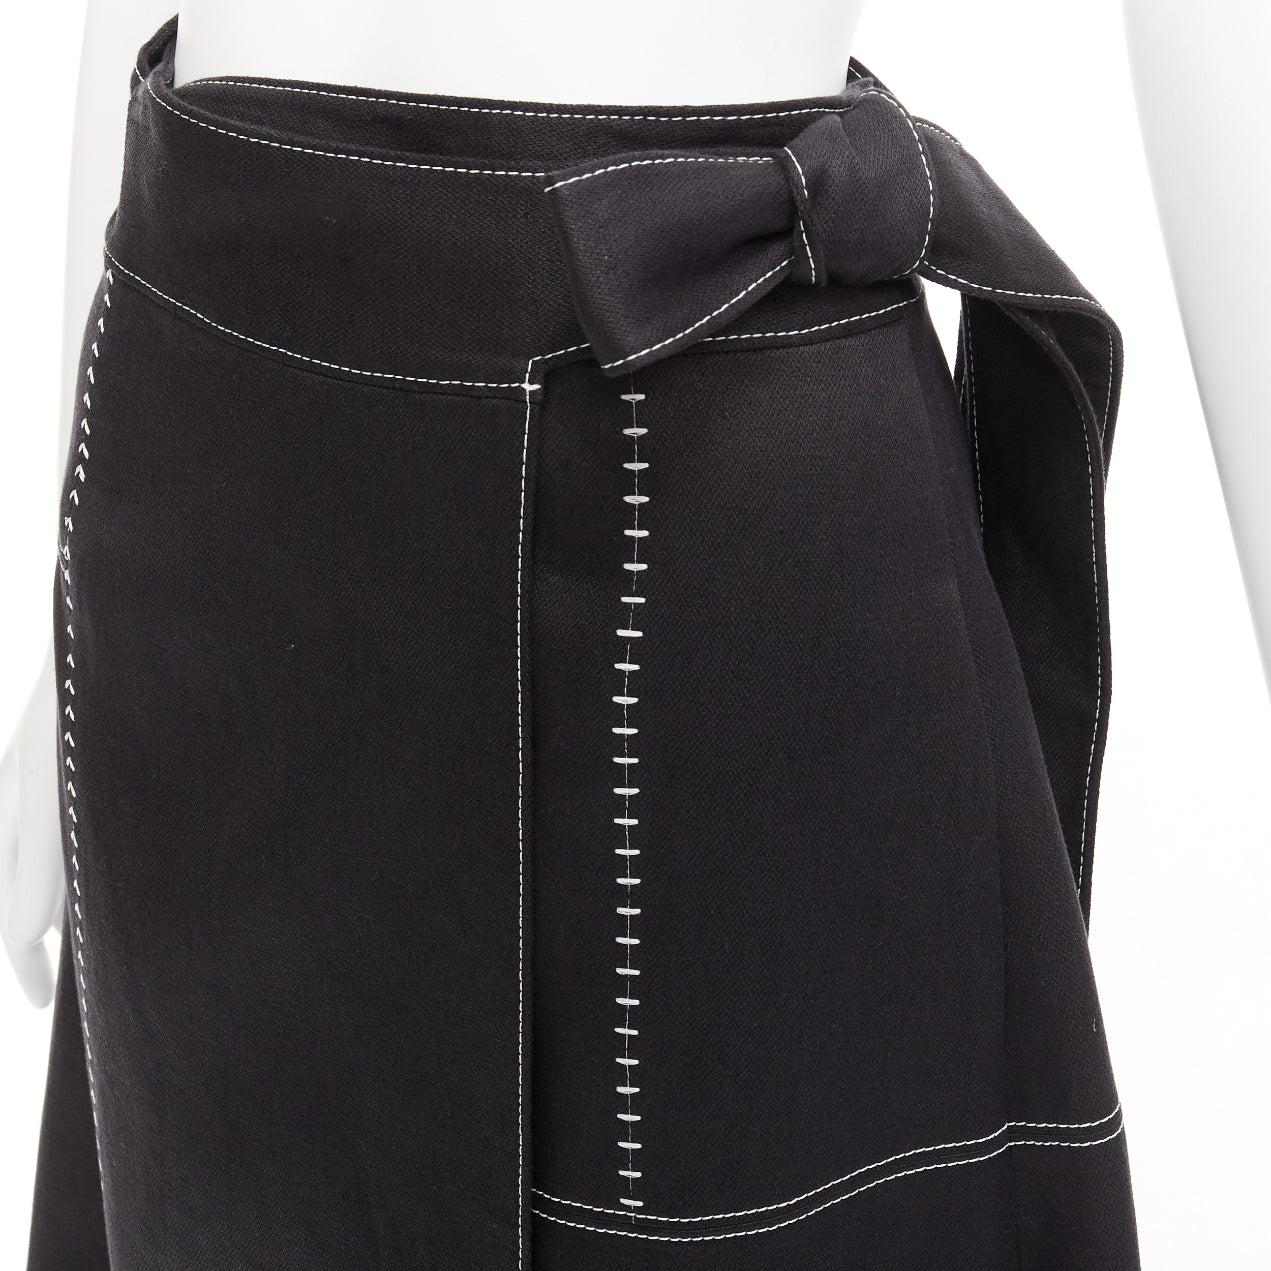 GABRIELA HEARST black 100% linen white overstitched panel wrap skirt IT36 XXS
Reference: LNKO/A02283
Brand: Gabriela Hearst
Material: Linen
Color: Black, White
Pattern: Solid
Closure: Wrap Tie
Lining: Black Silk
Extra Details: Patchwork with white